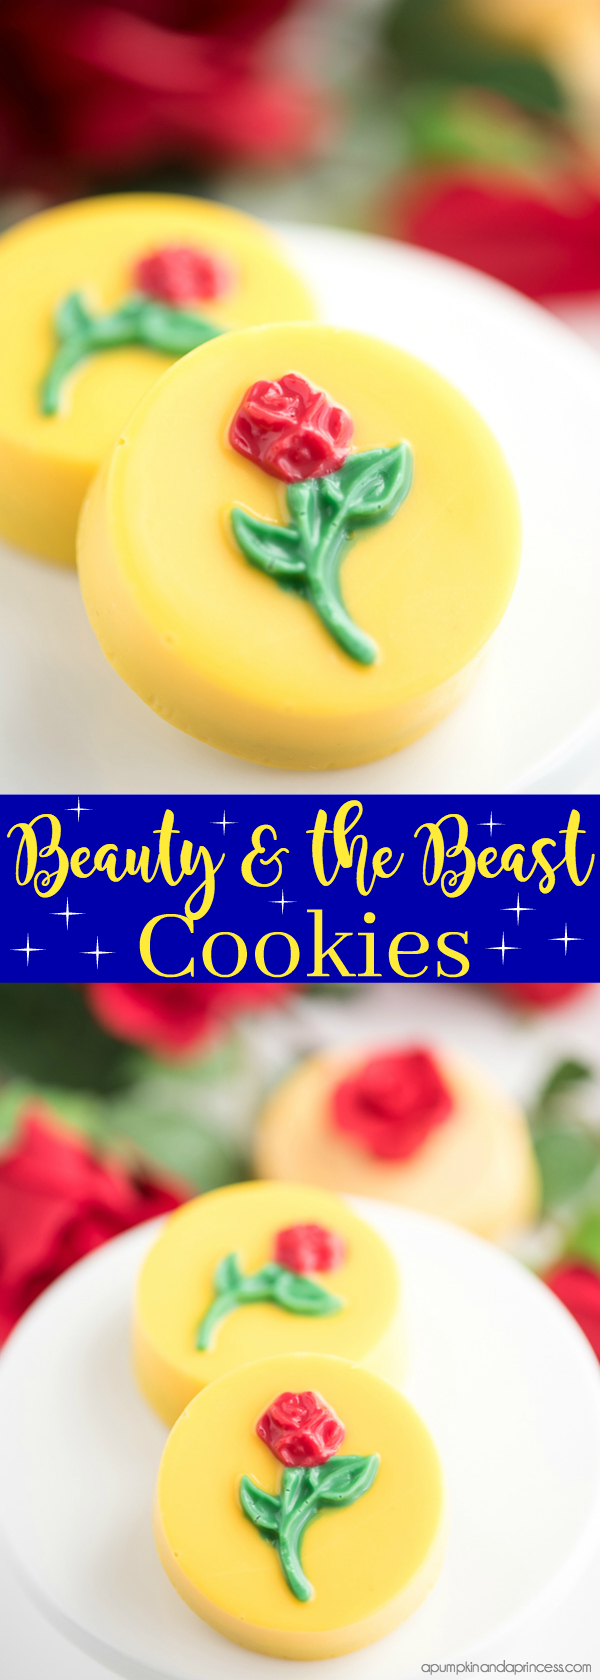 Beauty and the Beast Cookies - chocolate covered OREO cookies topped with a rose, perfect for a Beauty and the Beast party!